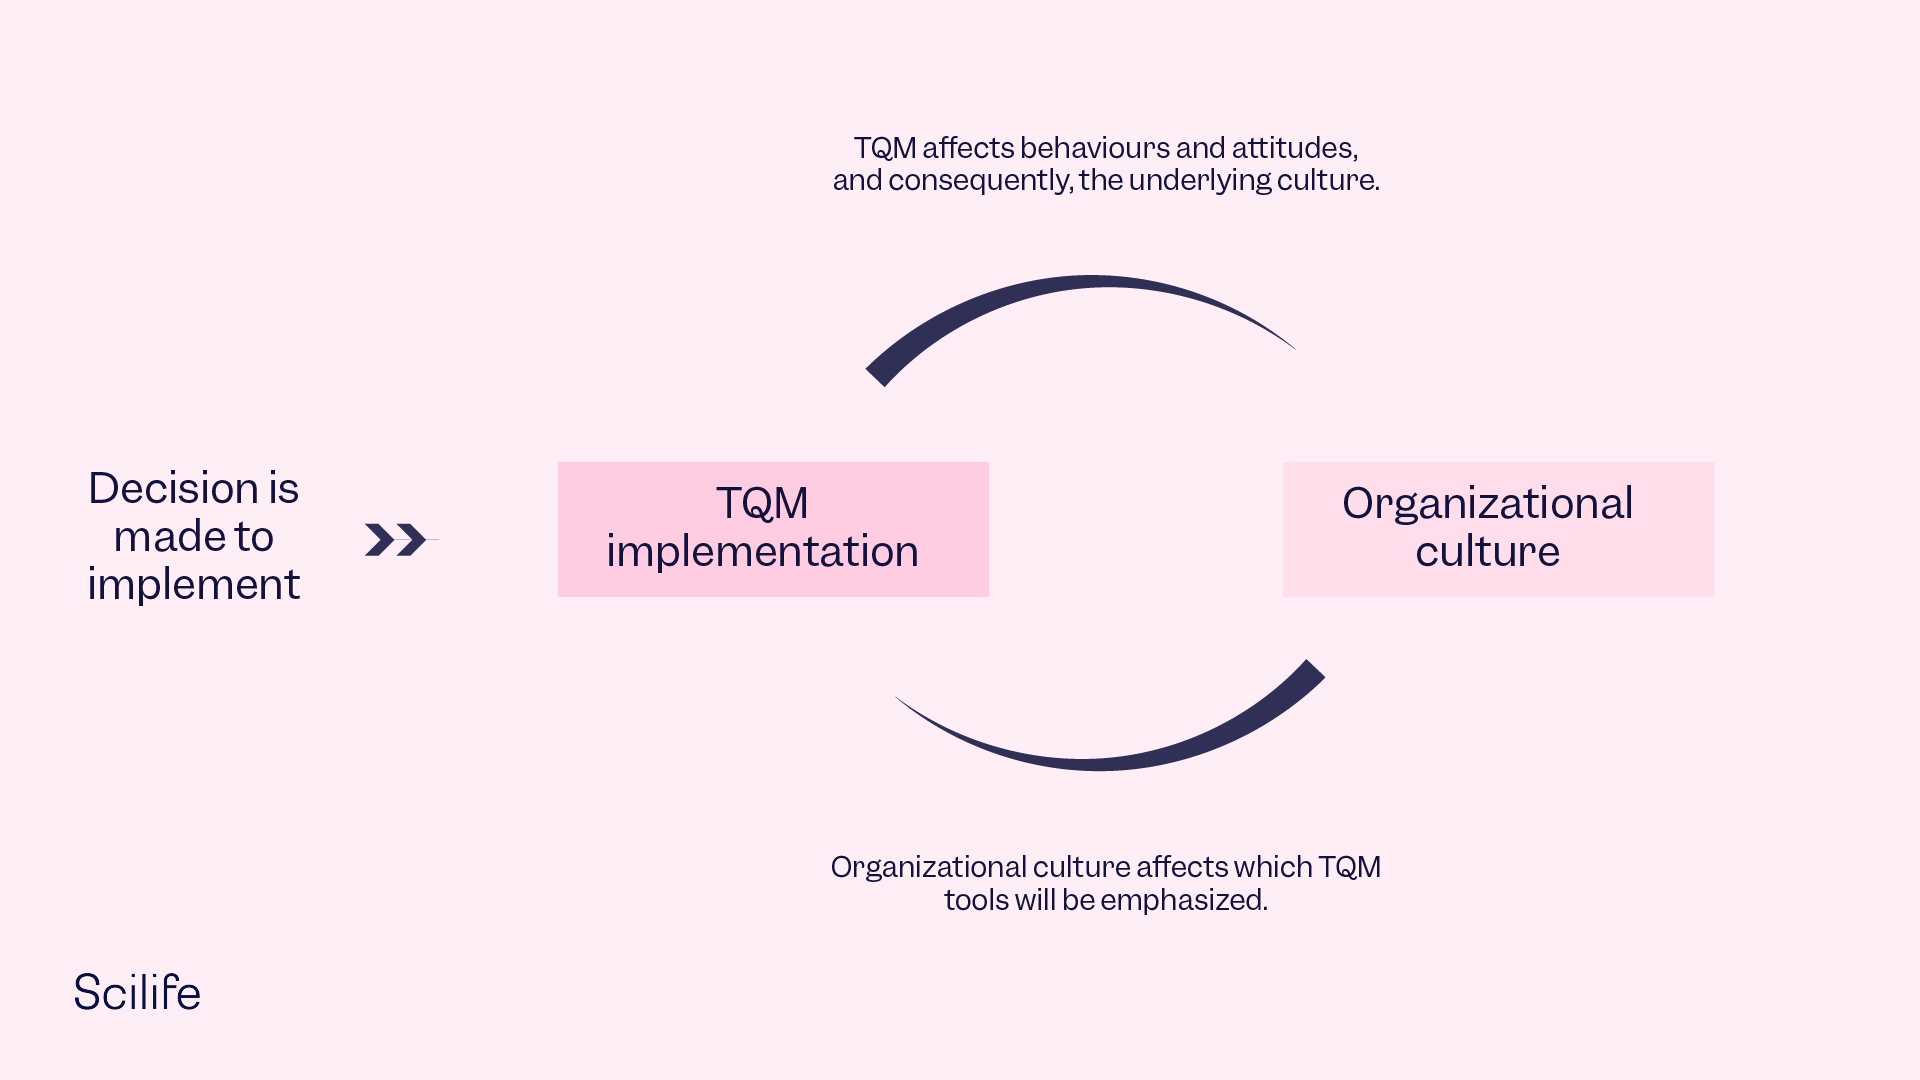 Relationship between TQM and organizational culture by Scilife.